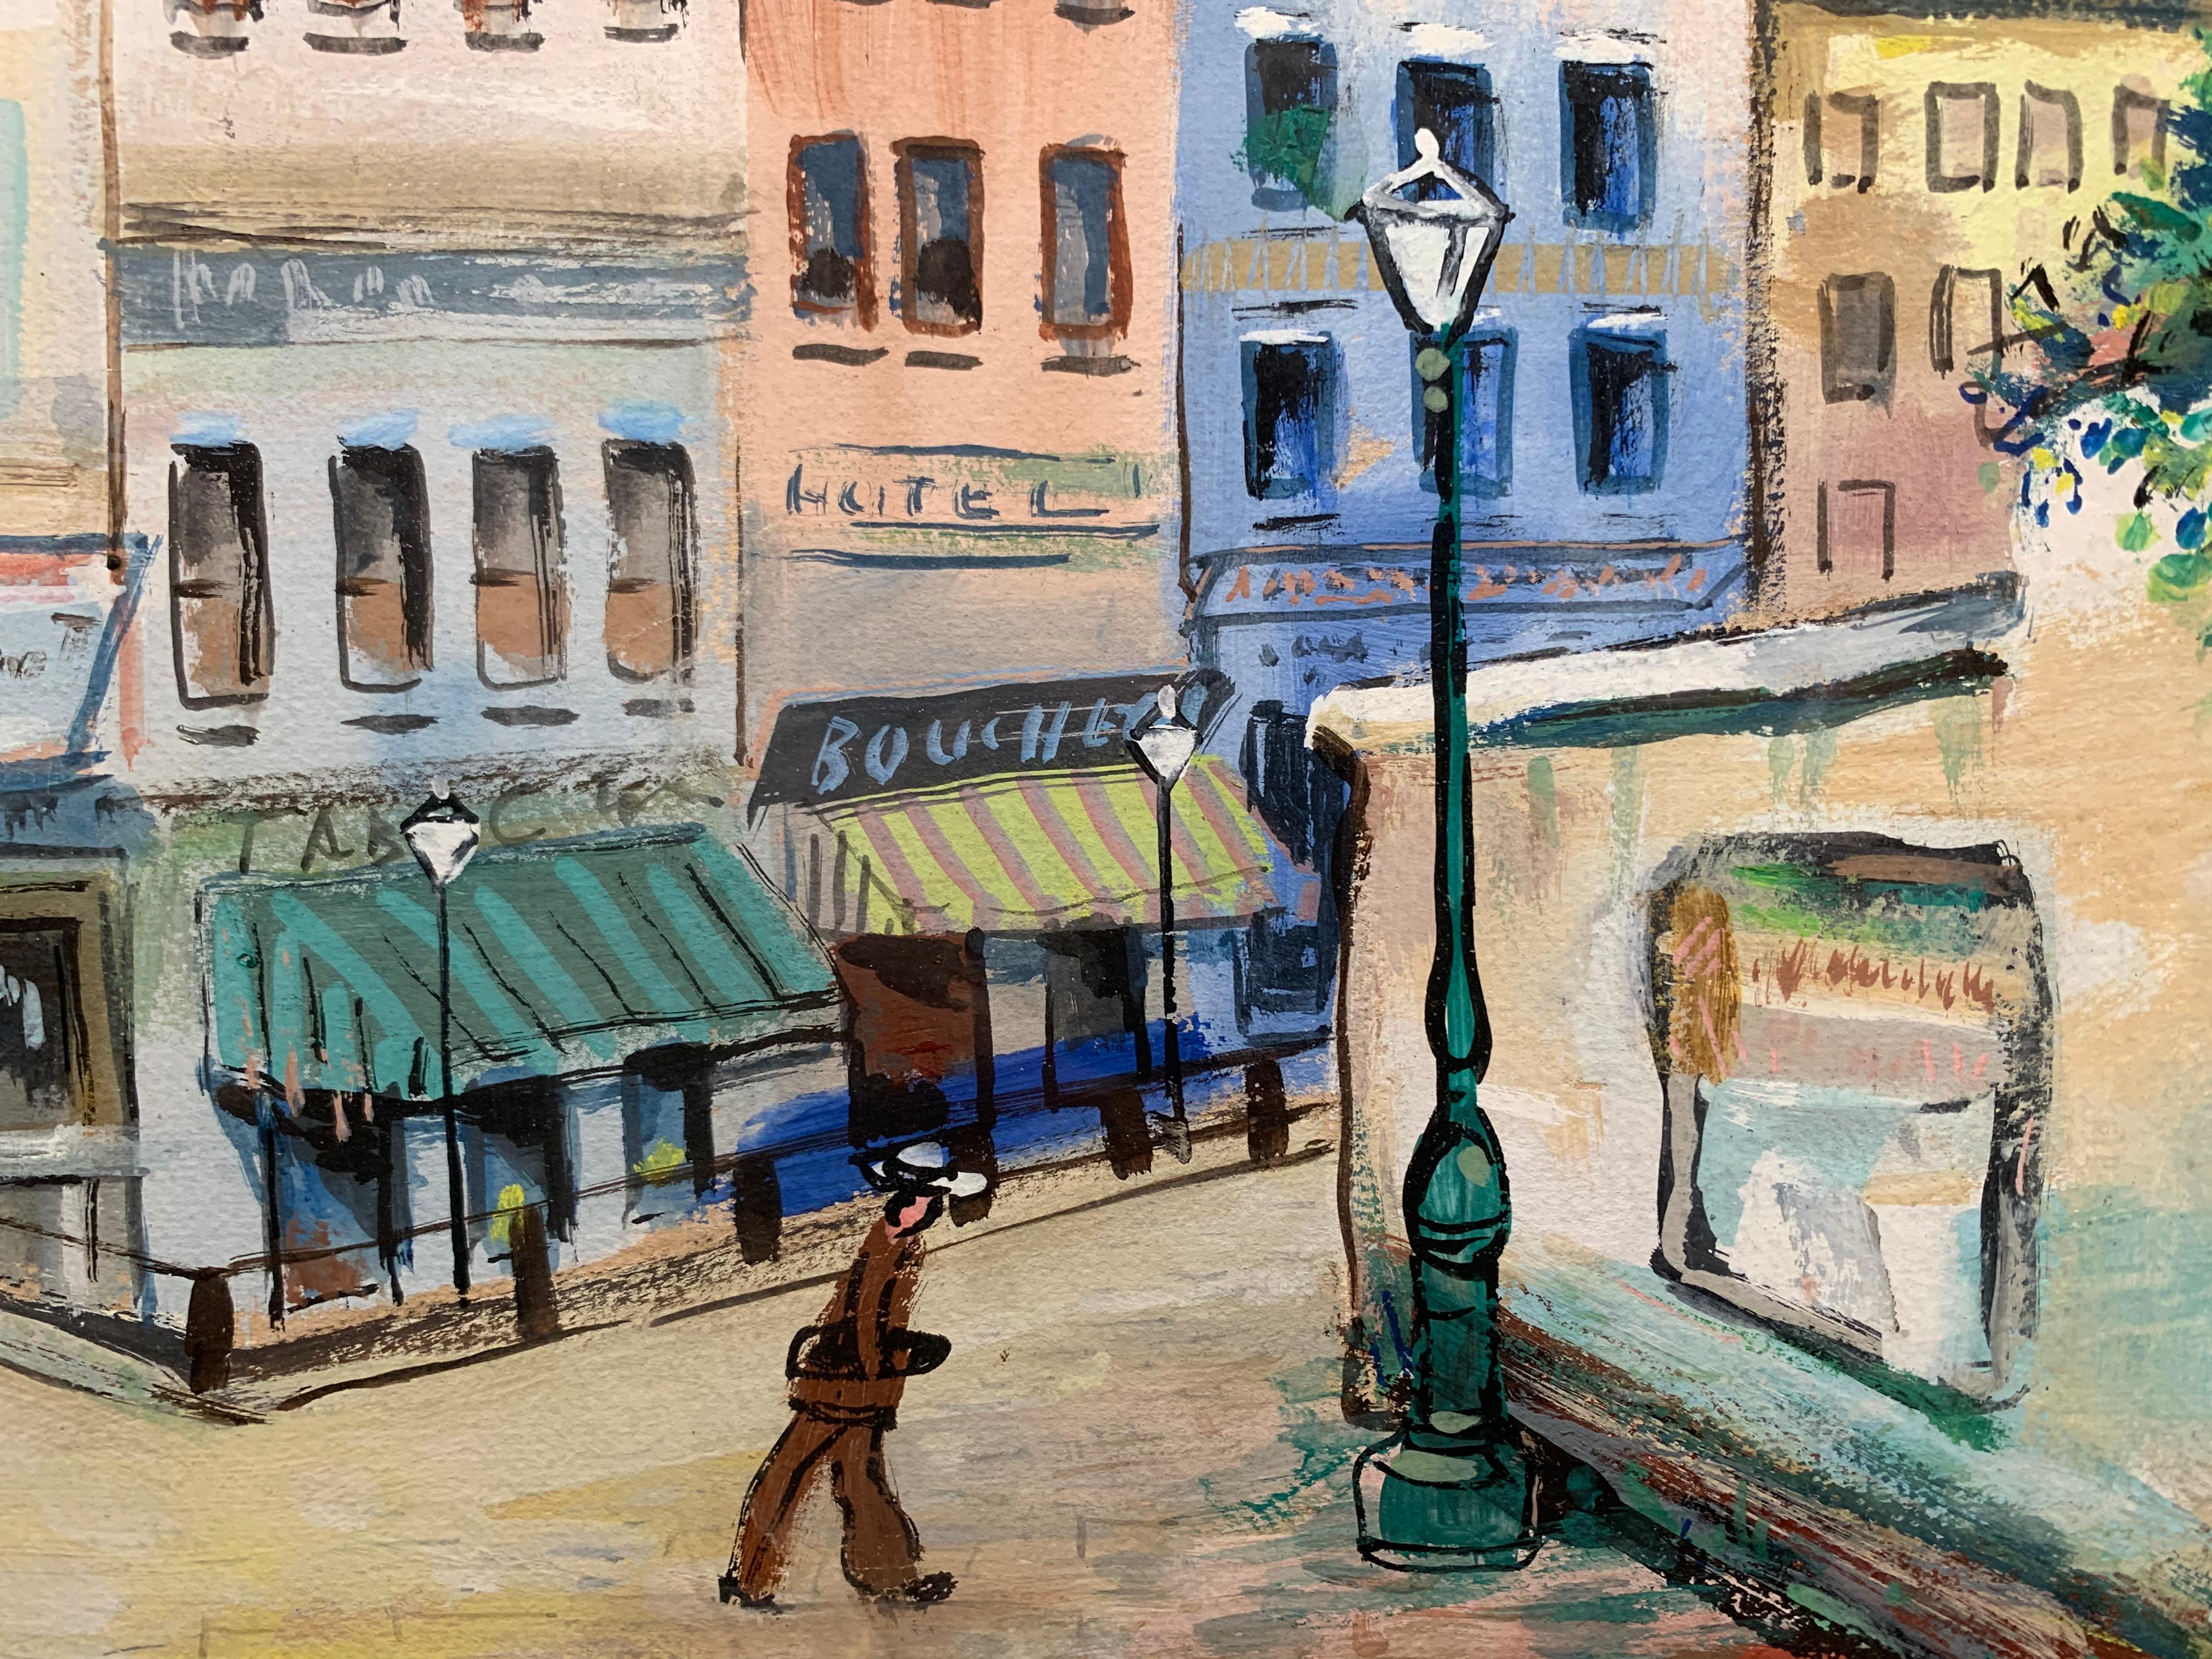 Beautiful Paris street scene signed Jabu. Montmartre, ca. 1950. Gouache on paper mounted to illustration board. Image measures 21 x 29 inches. Original matting and frame. Framed measurement: 31 x 39 inches. Frame displays some scratches and wear